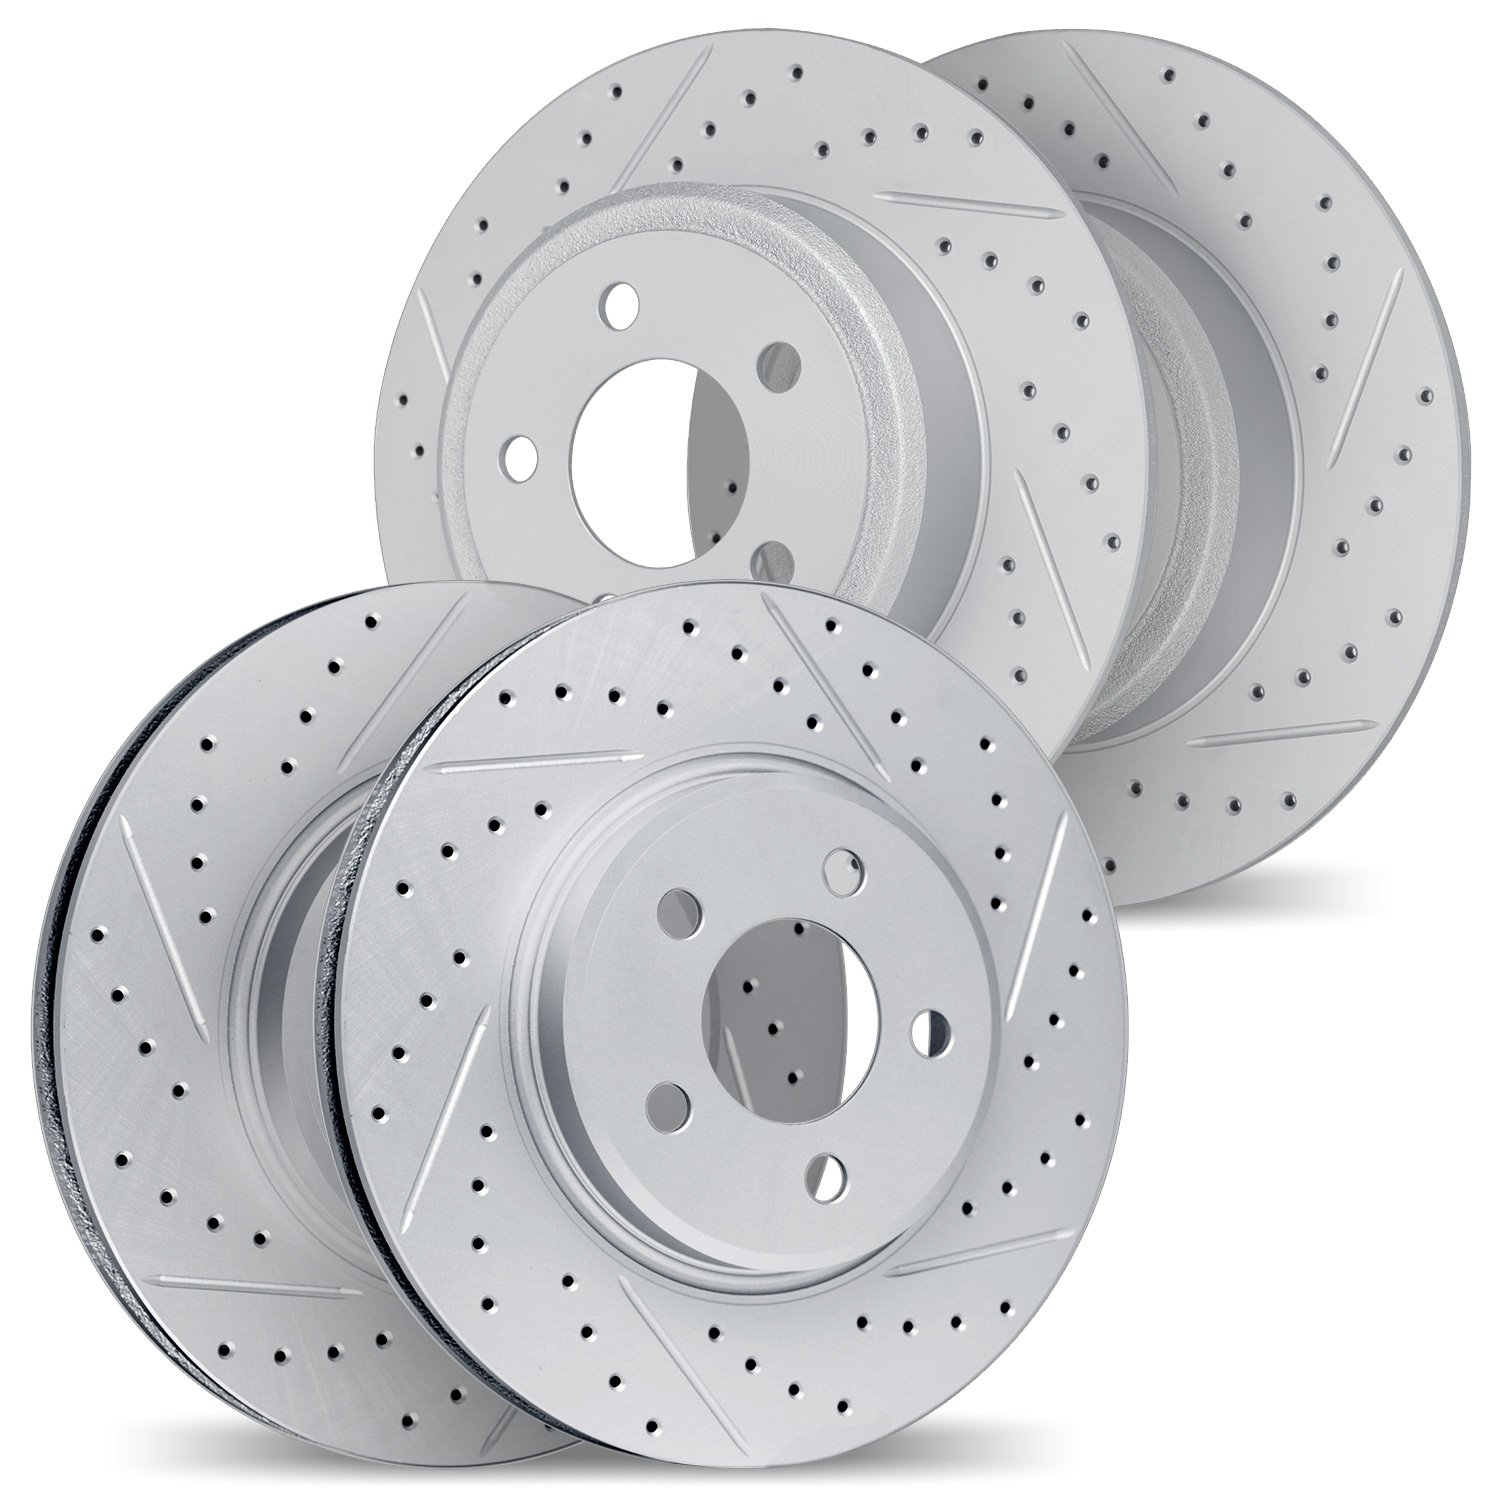 2004-73048 Geoperformance Drilled/Slotted Brake Rotors, Fits Select Audi/Volkswagen, Position: Front and Rear